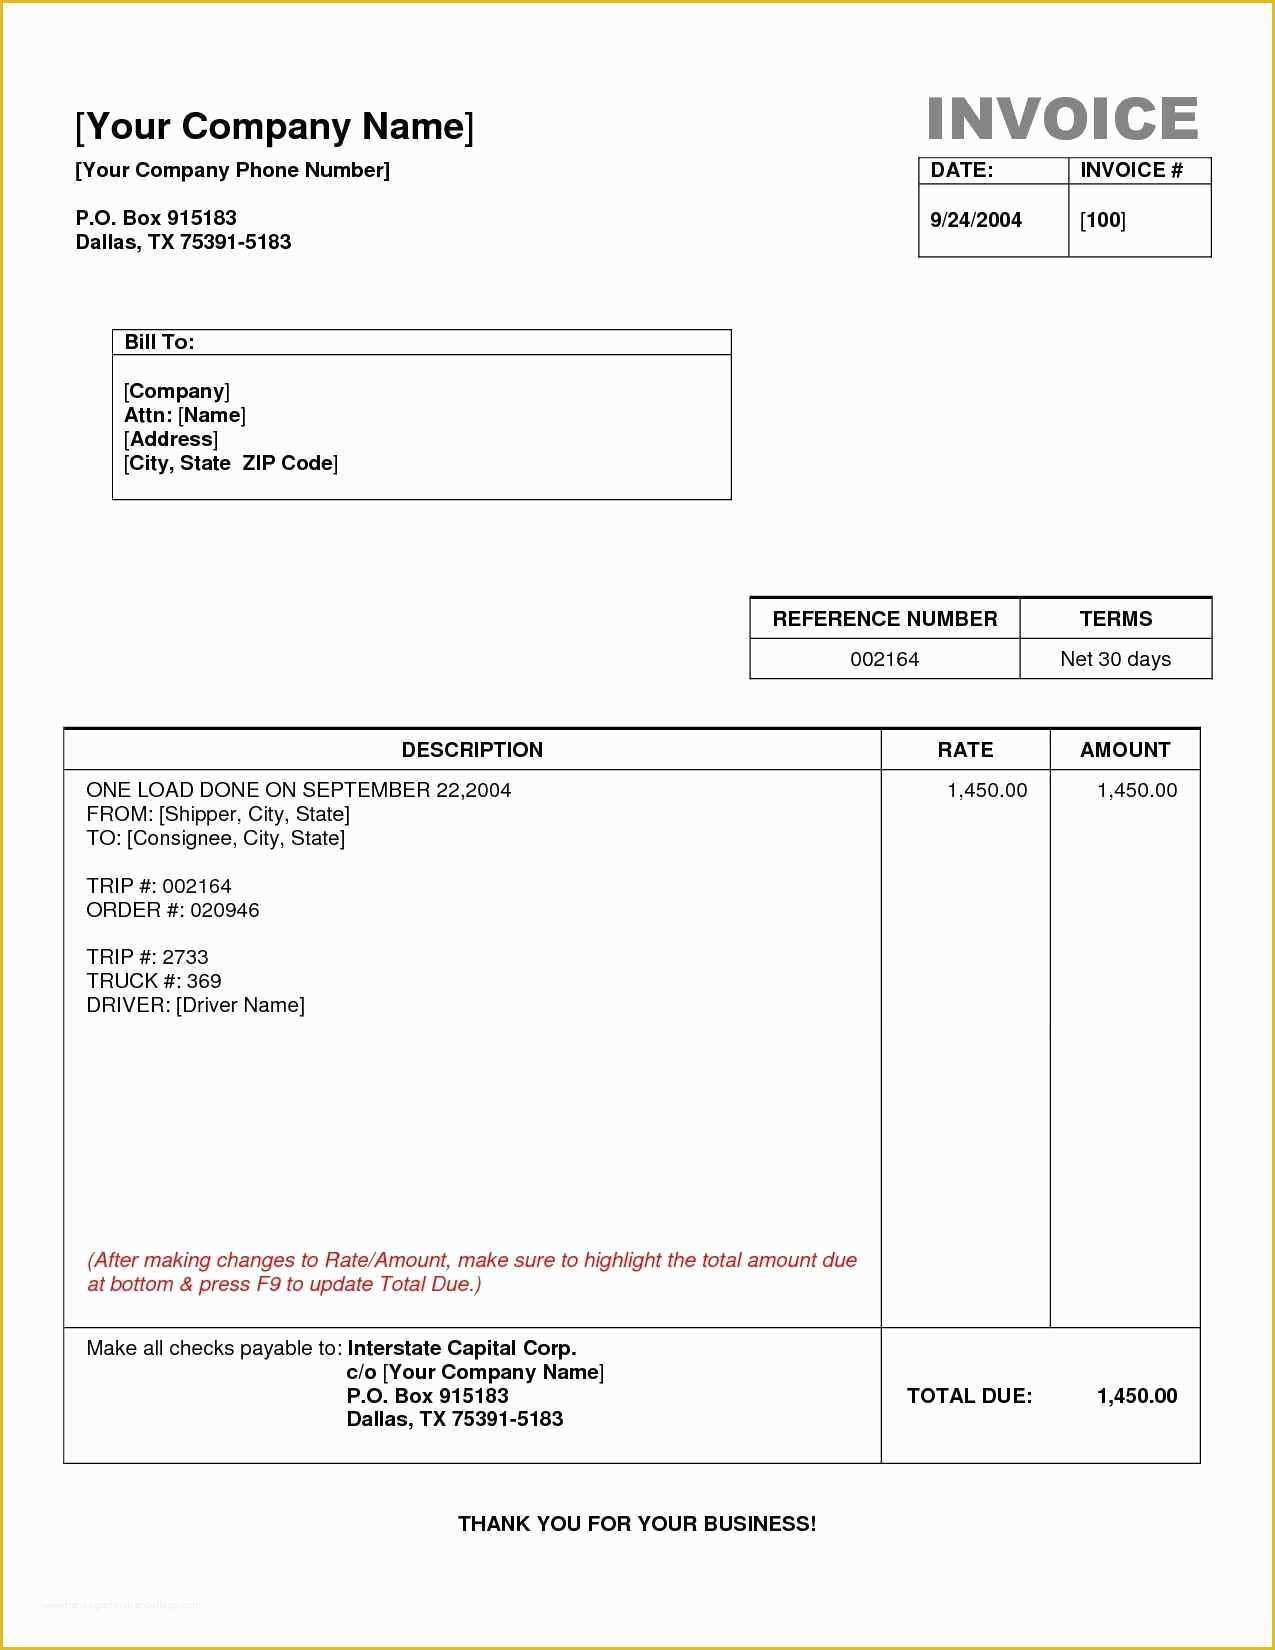 Transportation Invoice Template Free Of Transportation Invoice Template Free and Trucking Pany